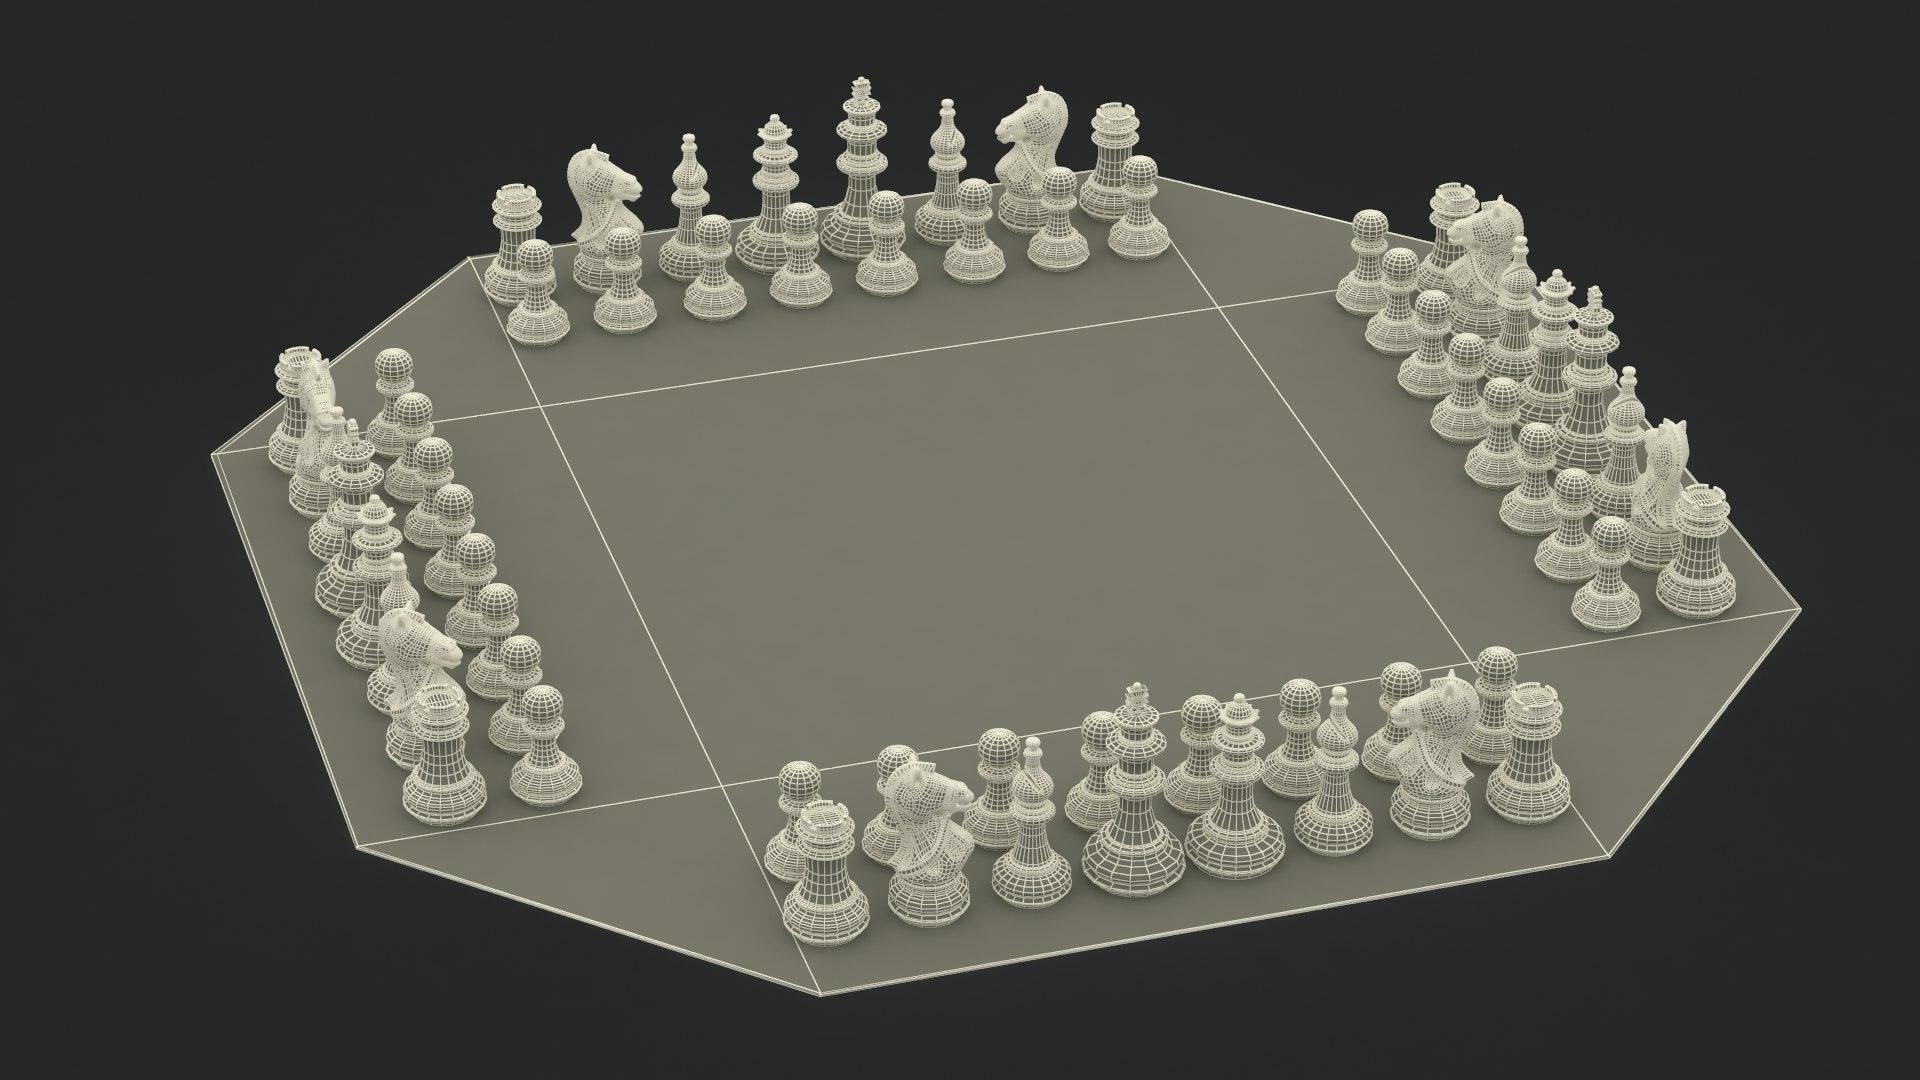 4 Player Chess concept + tutorial 👇 - Demos and projects - Babylon.js